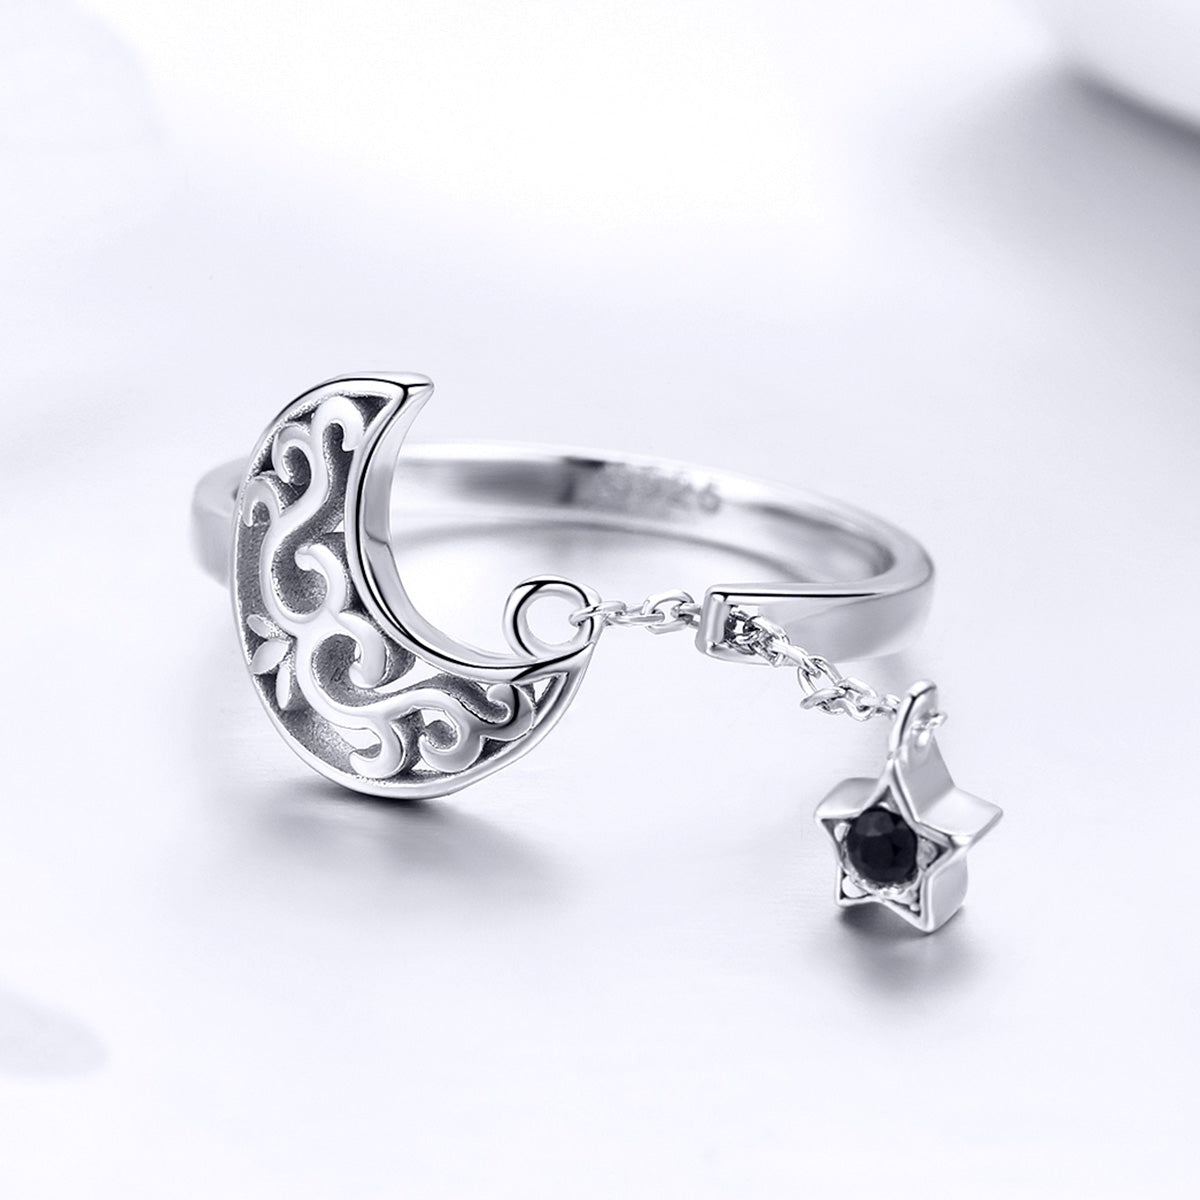 Moon with Star on Long Chain Adjustable Ring - Sterling Silver 925 - Black ZIRCON - NEW622